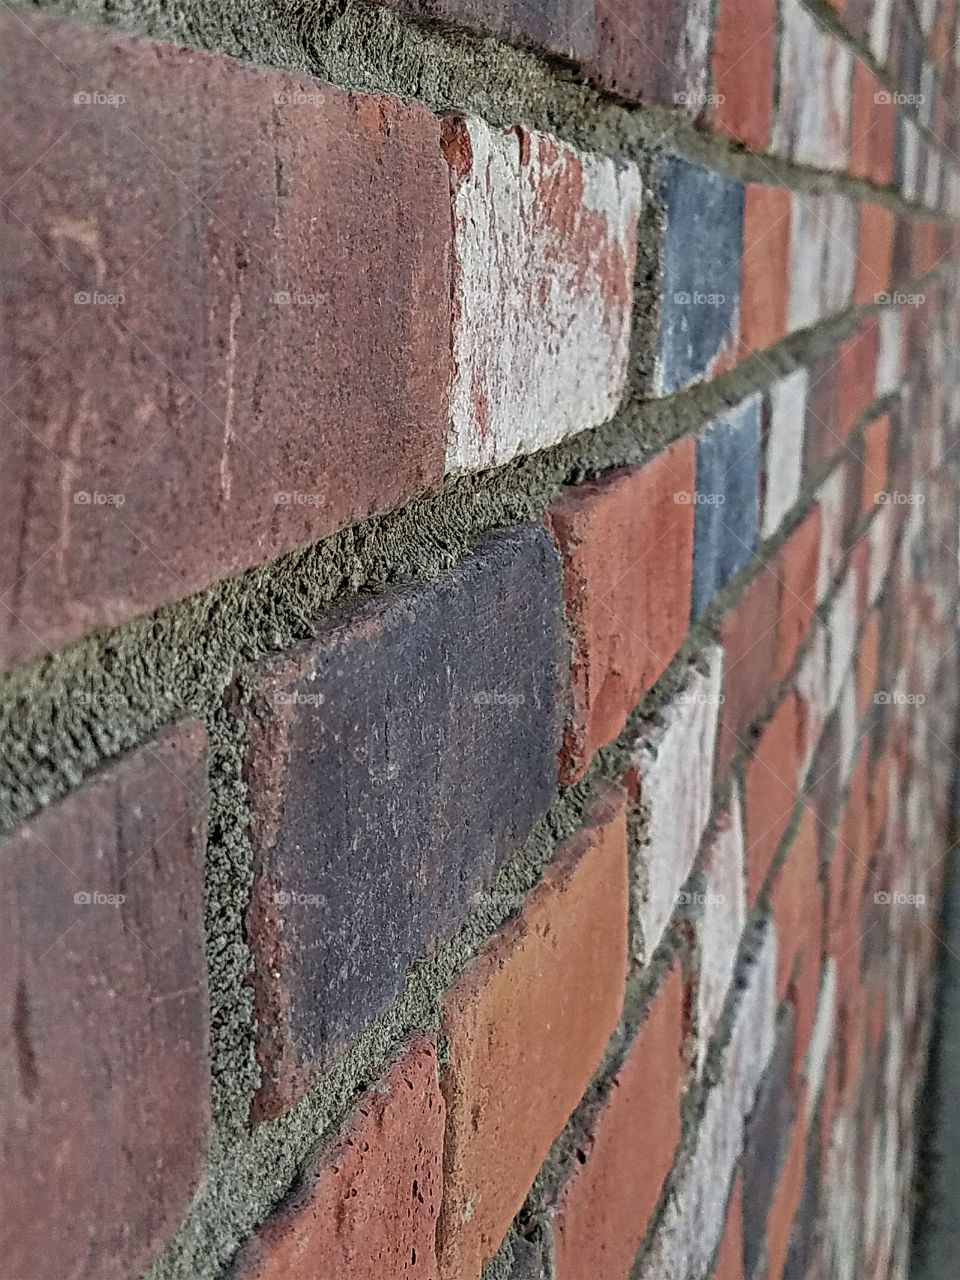 Crumbling grout in an old brick wall!